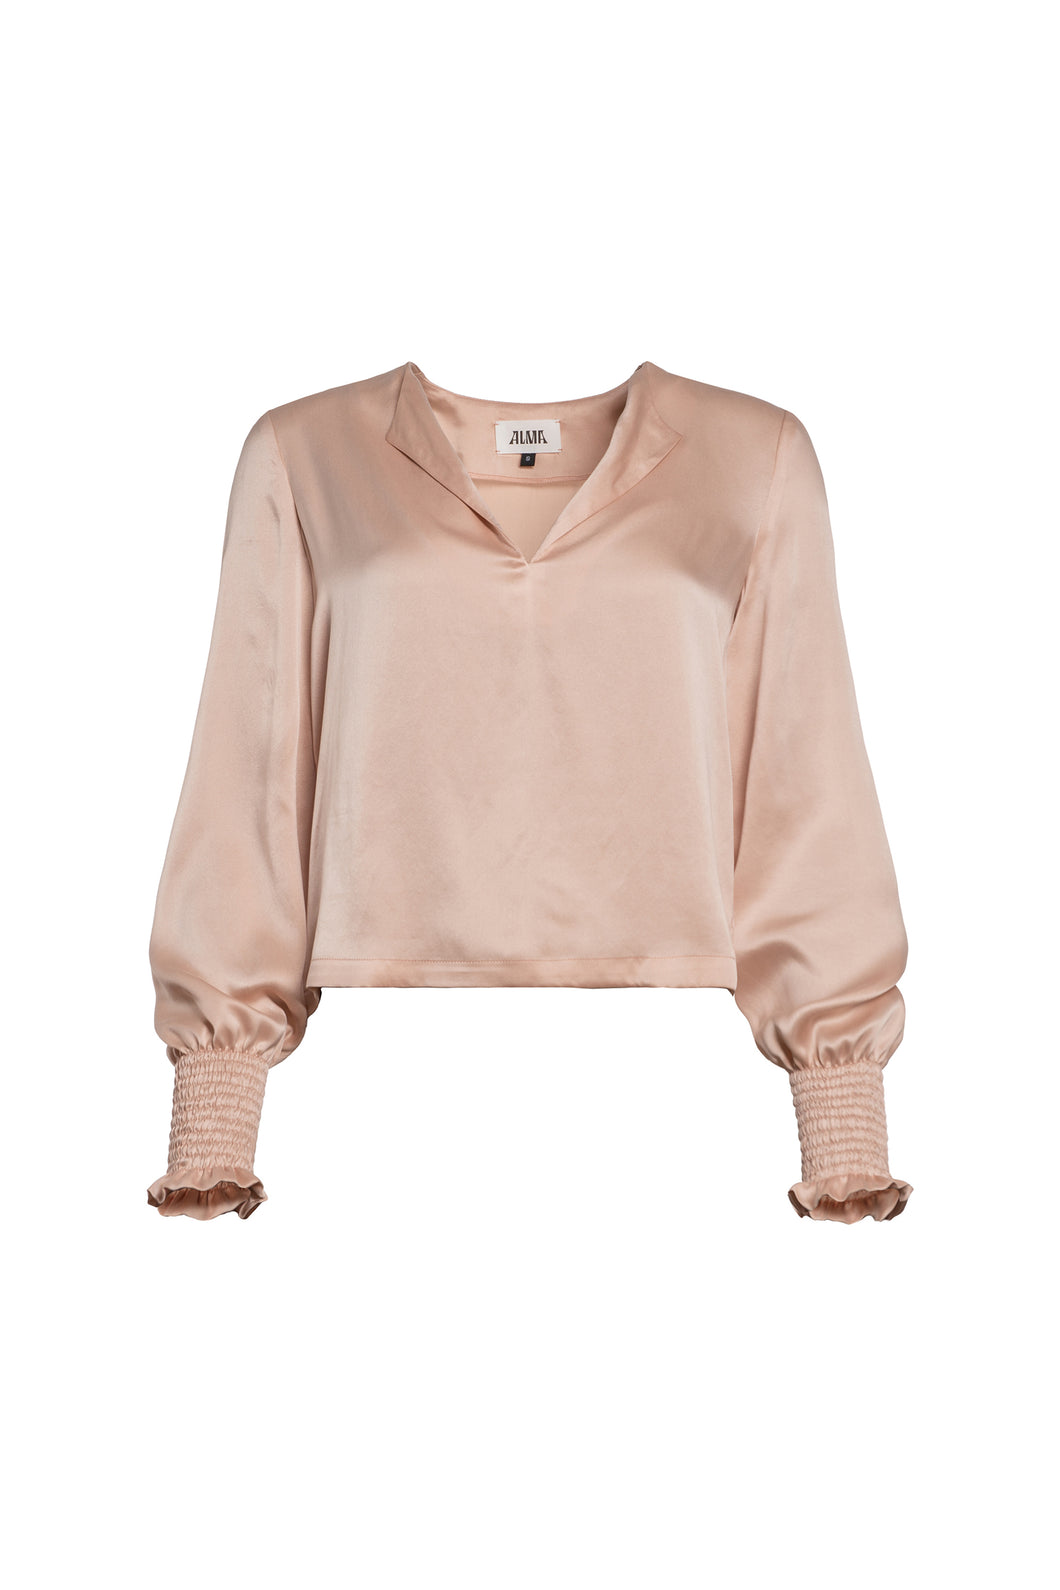 Giggle silk blouse / champagne